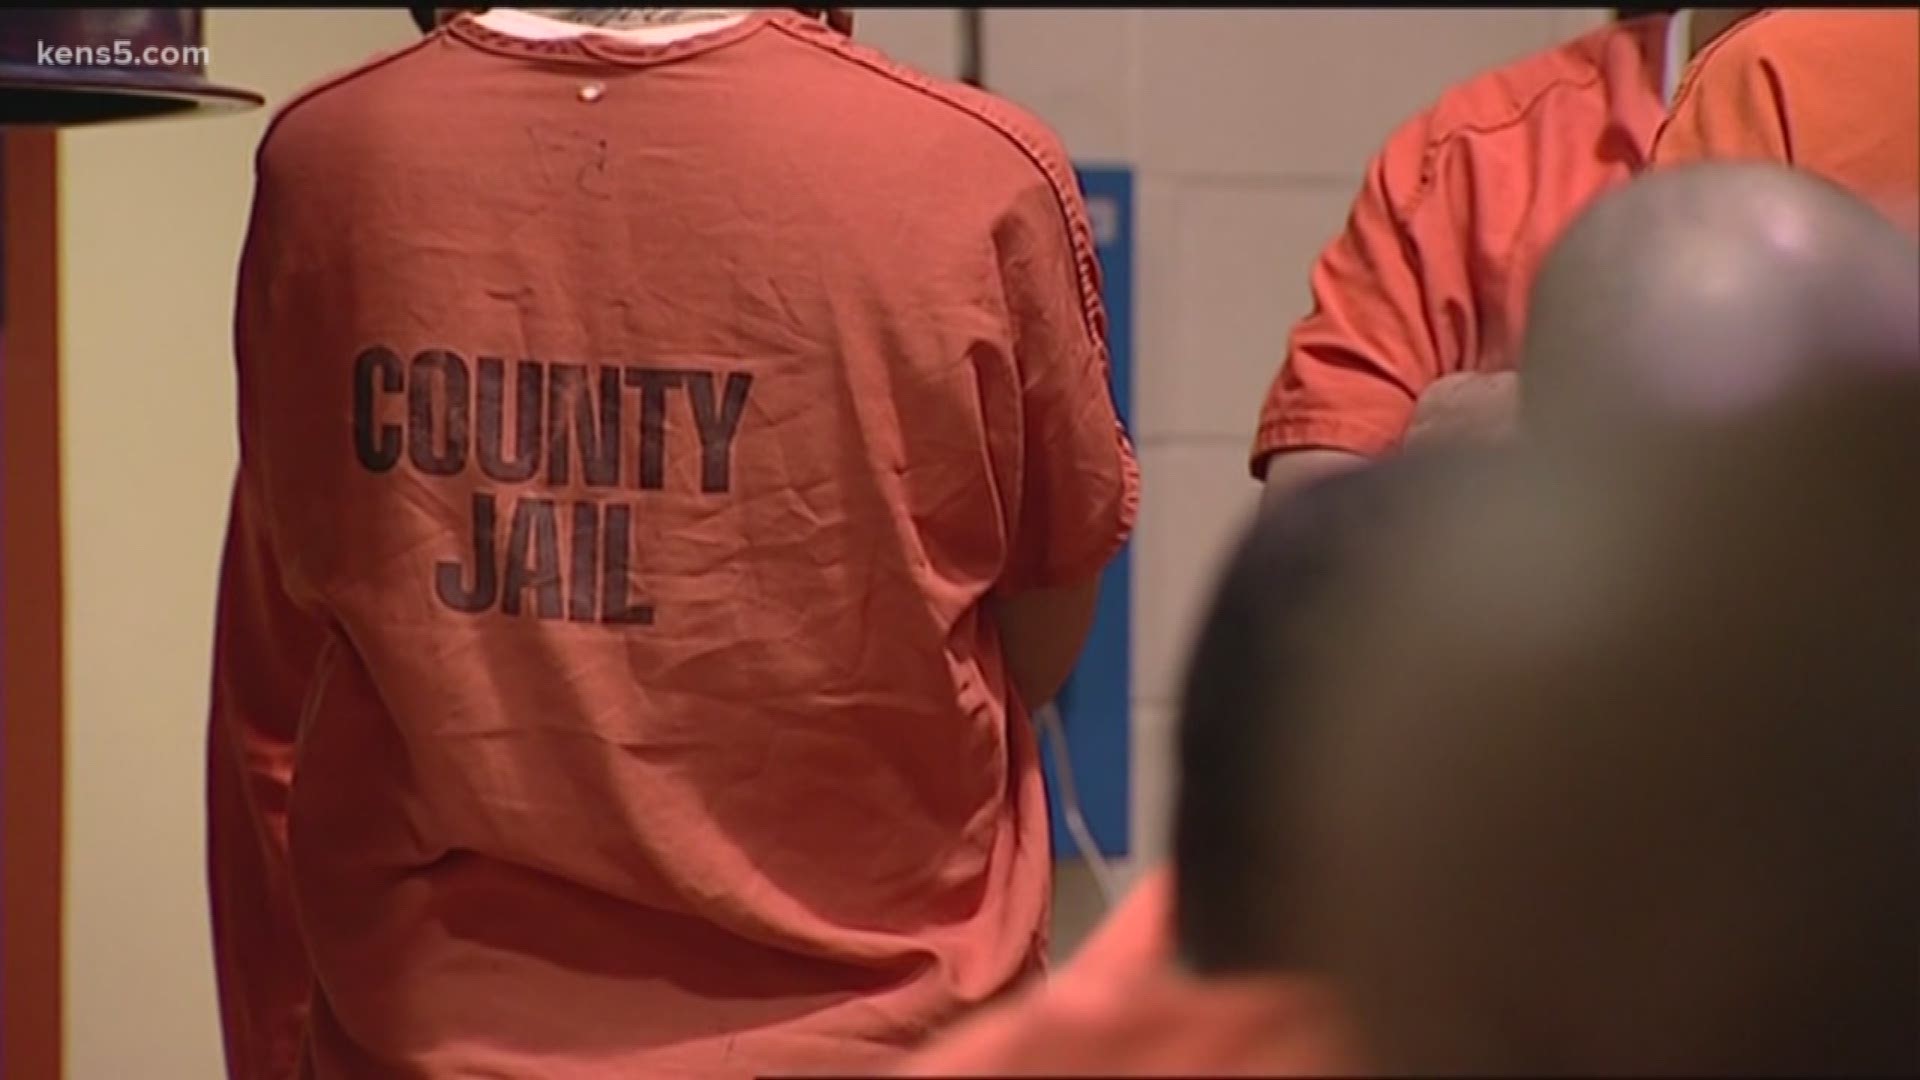 We're learning more about the fight to stop the coronavirus outbreak in the Bexar County jail.